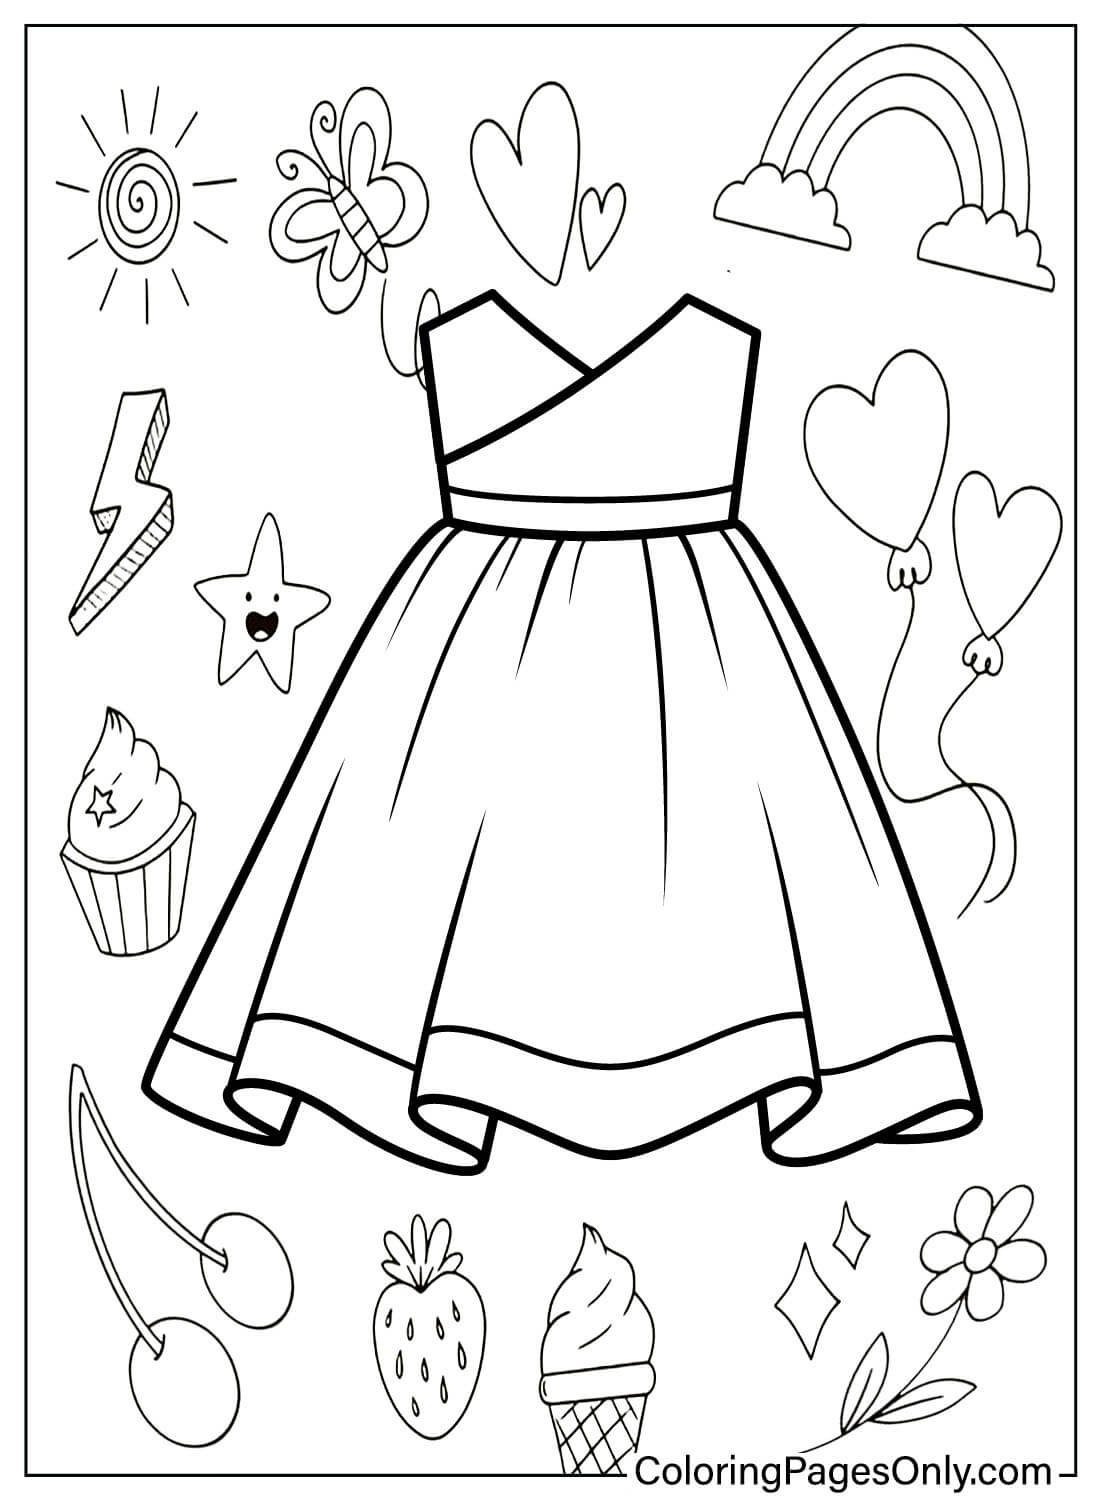 Printable Baby Dress Coloring Page from Baby Dress